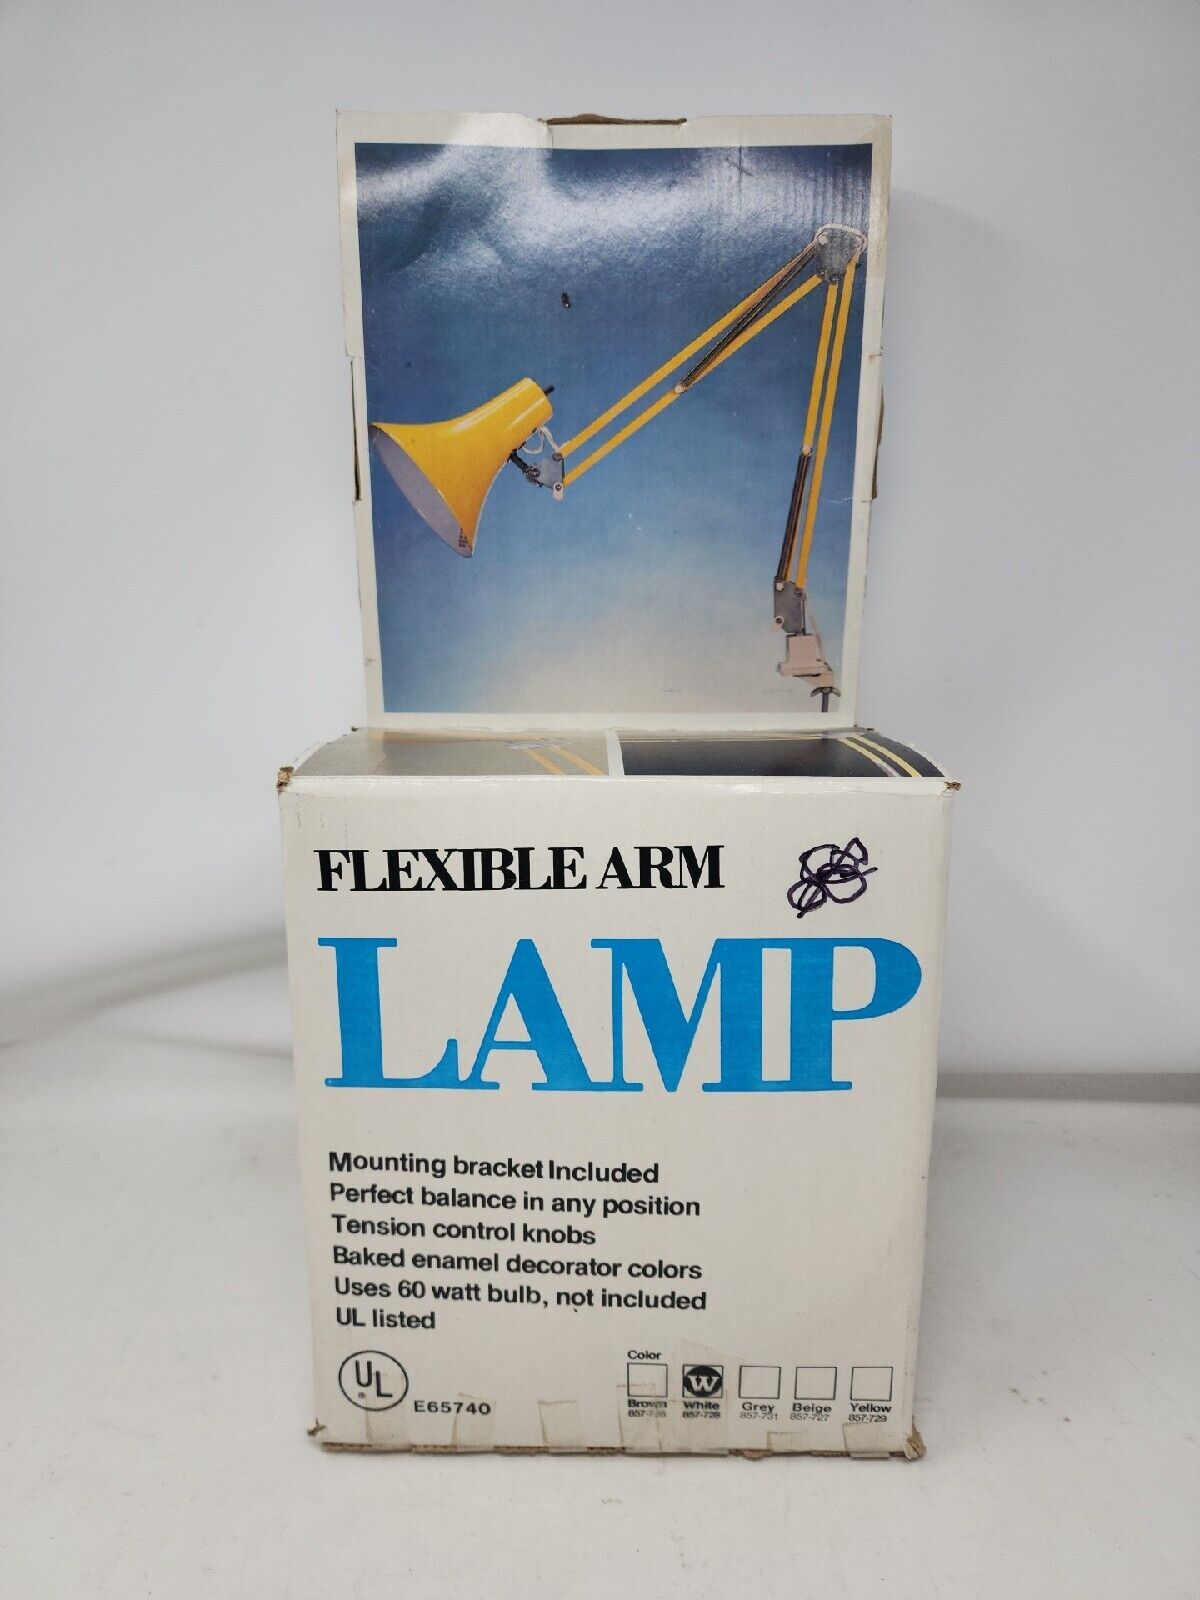 NOS Vintage Luxo Task Lamp Articulated Flexible Arm & Clamp - White w/Box